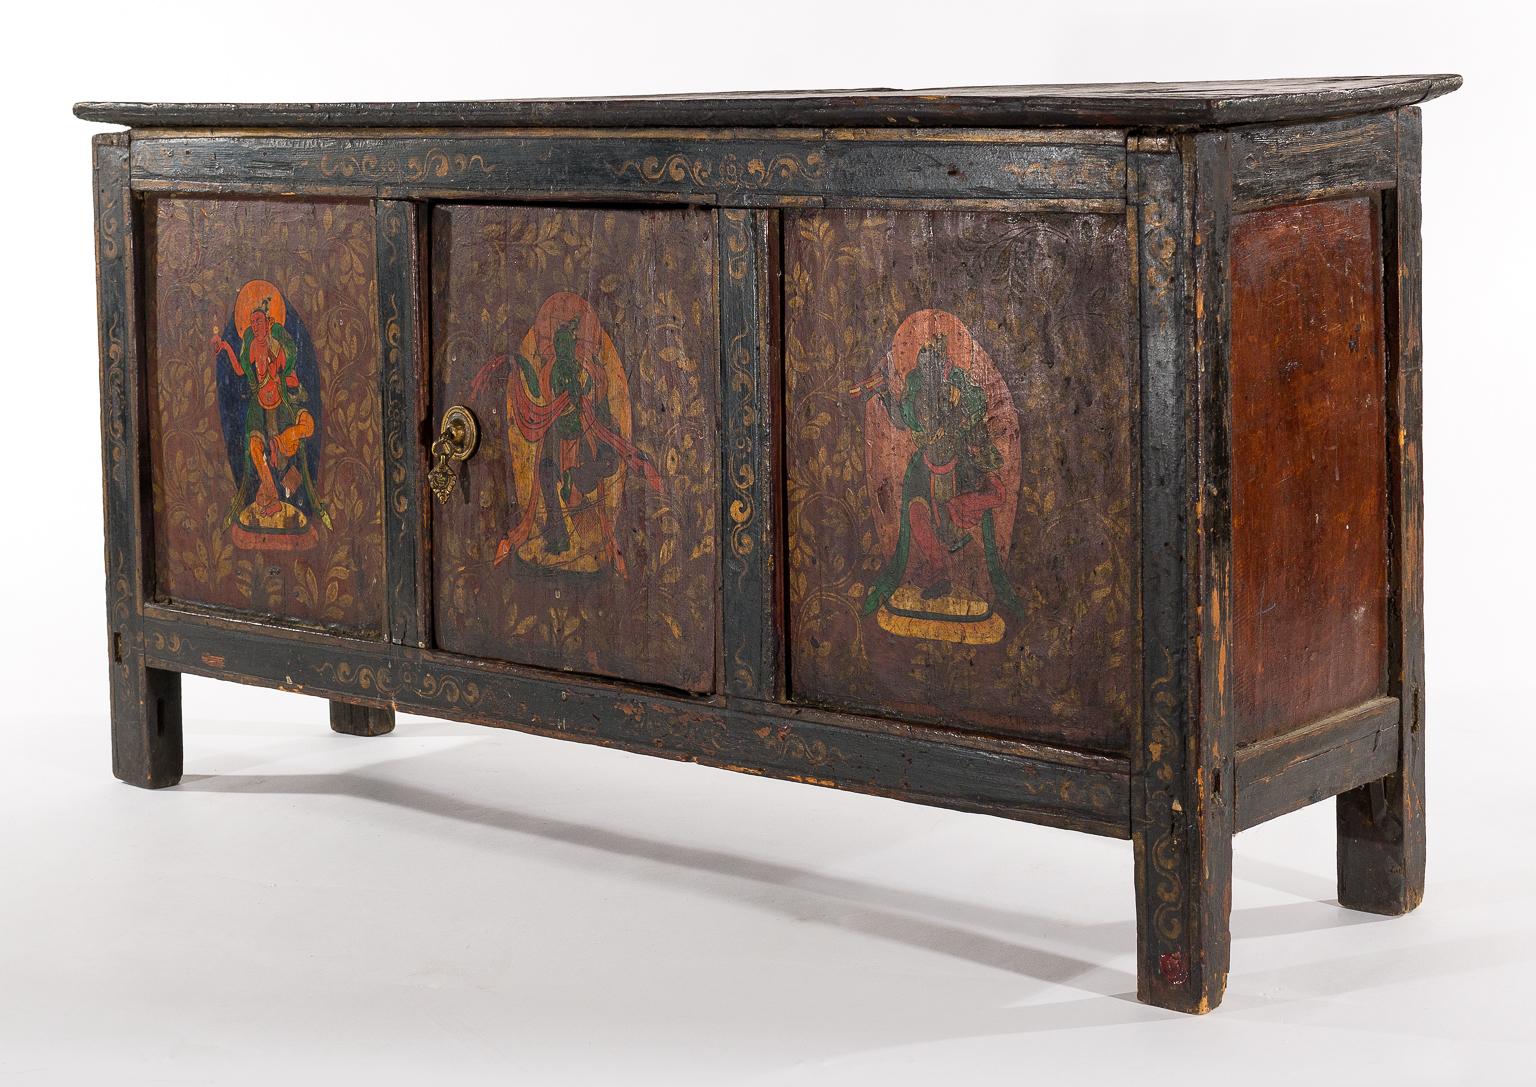 This antique table has incredible original antique painting on it depicting benevolent deities that represent wisdom and protection. This table was probably originally used in a monastery in Tibet possibly as part of an altar room. A very rare